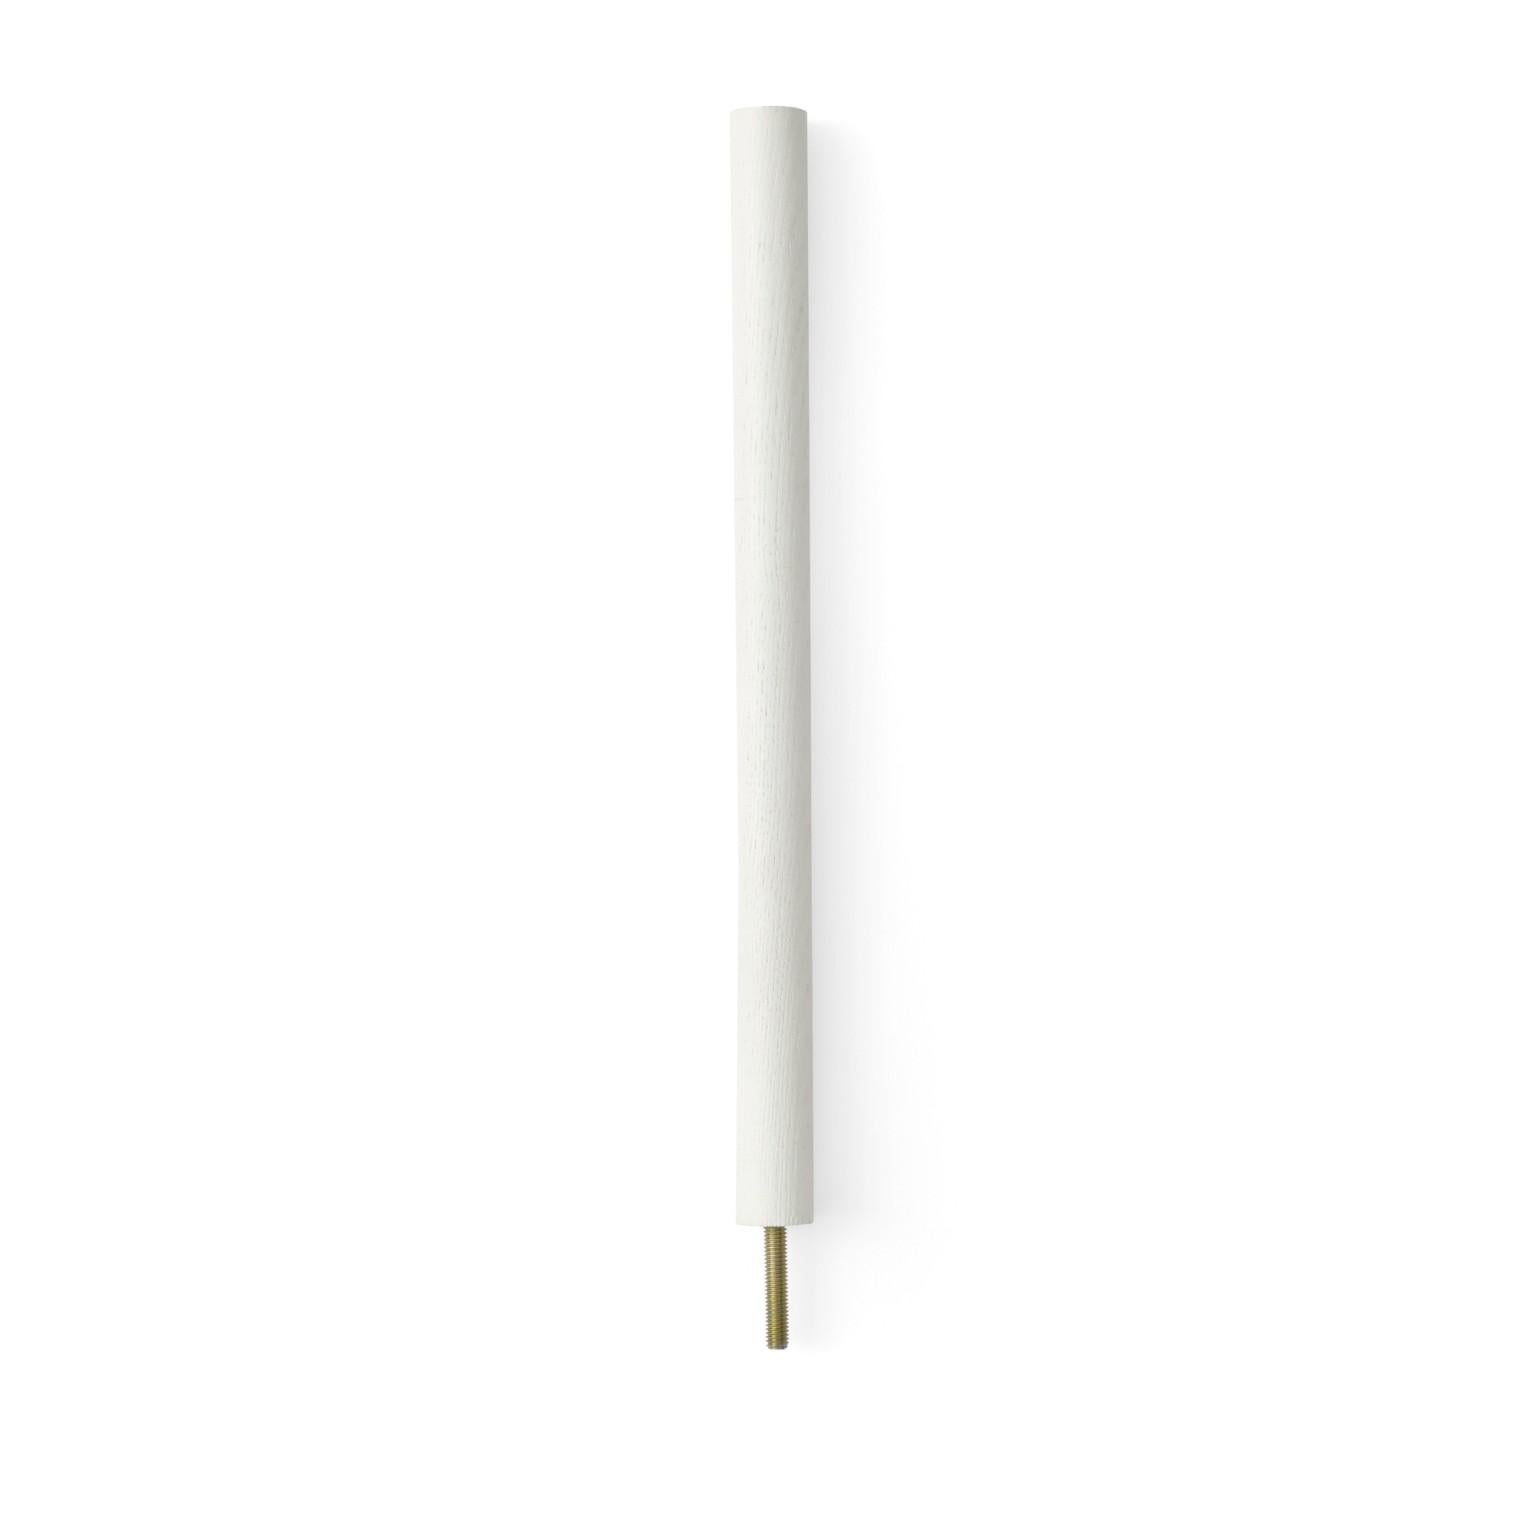 Scandinavian Modern Stick System, White Shelves with White Poles, 3x2 For Sale